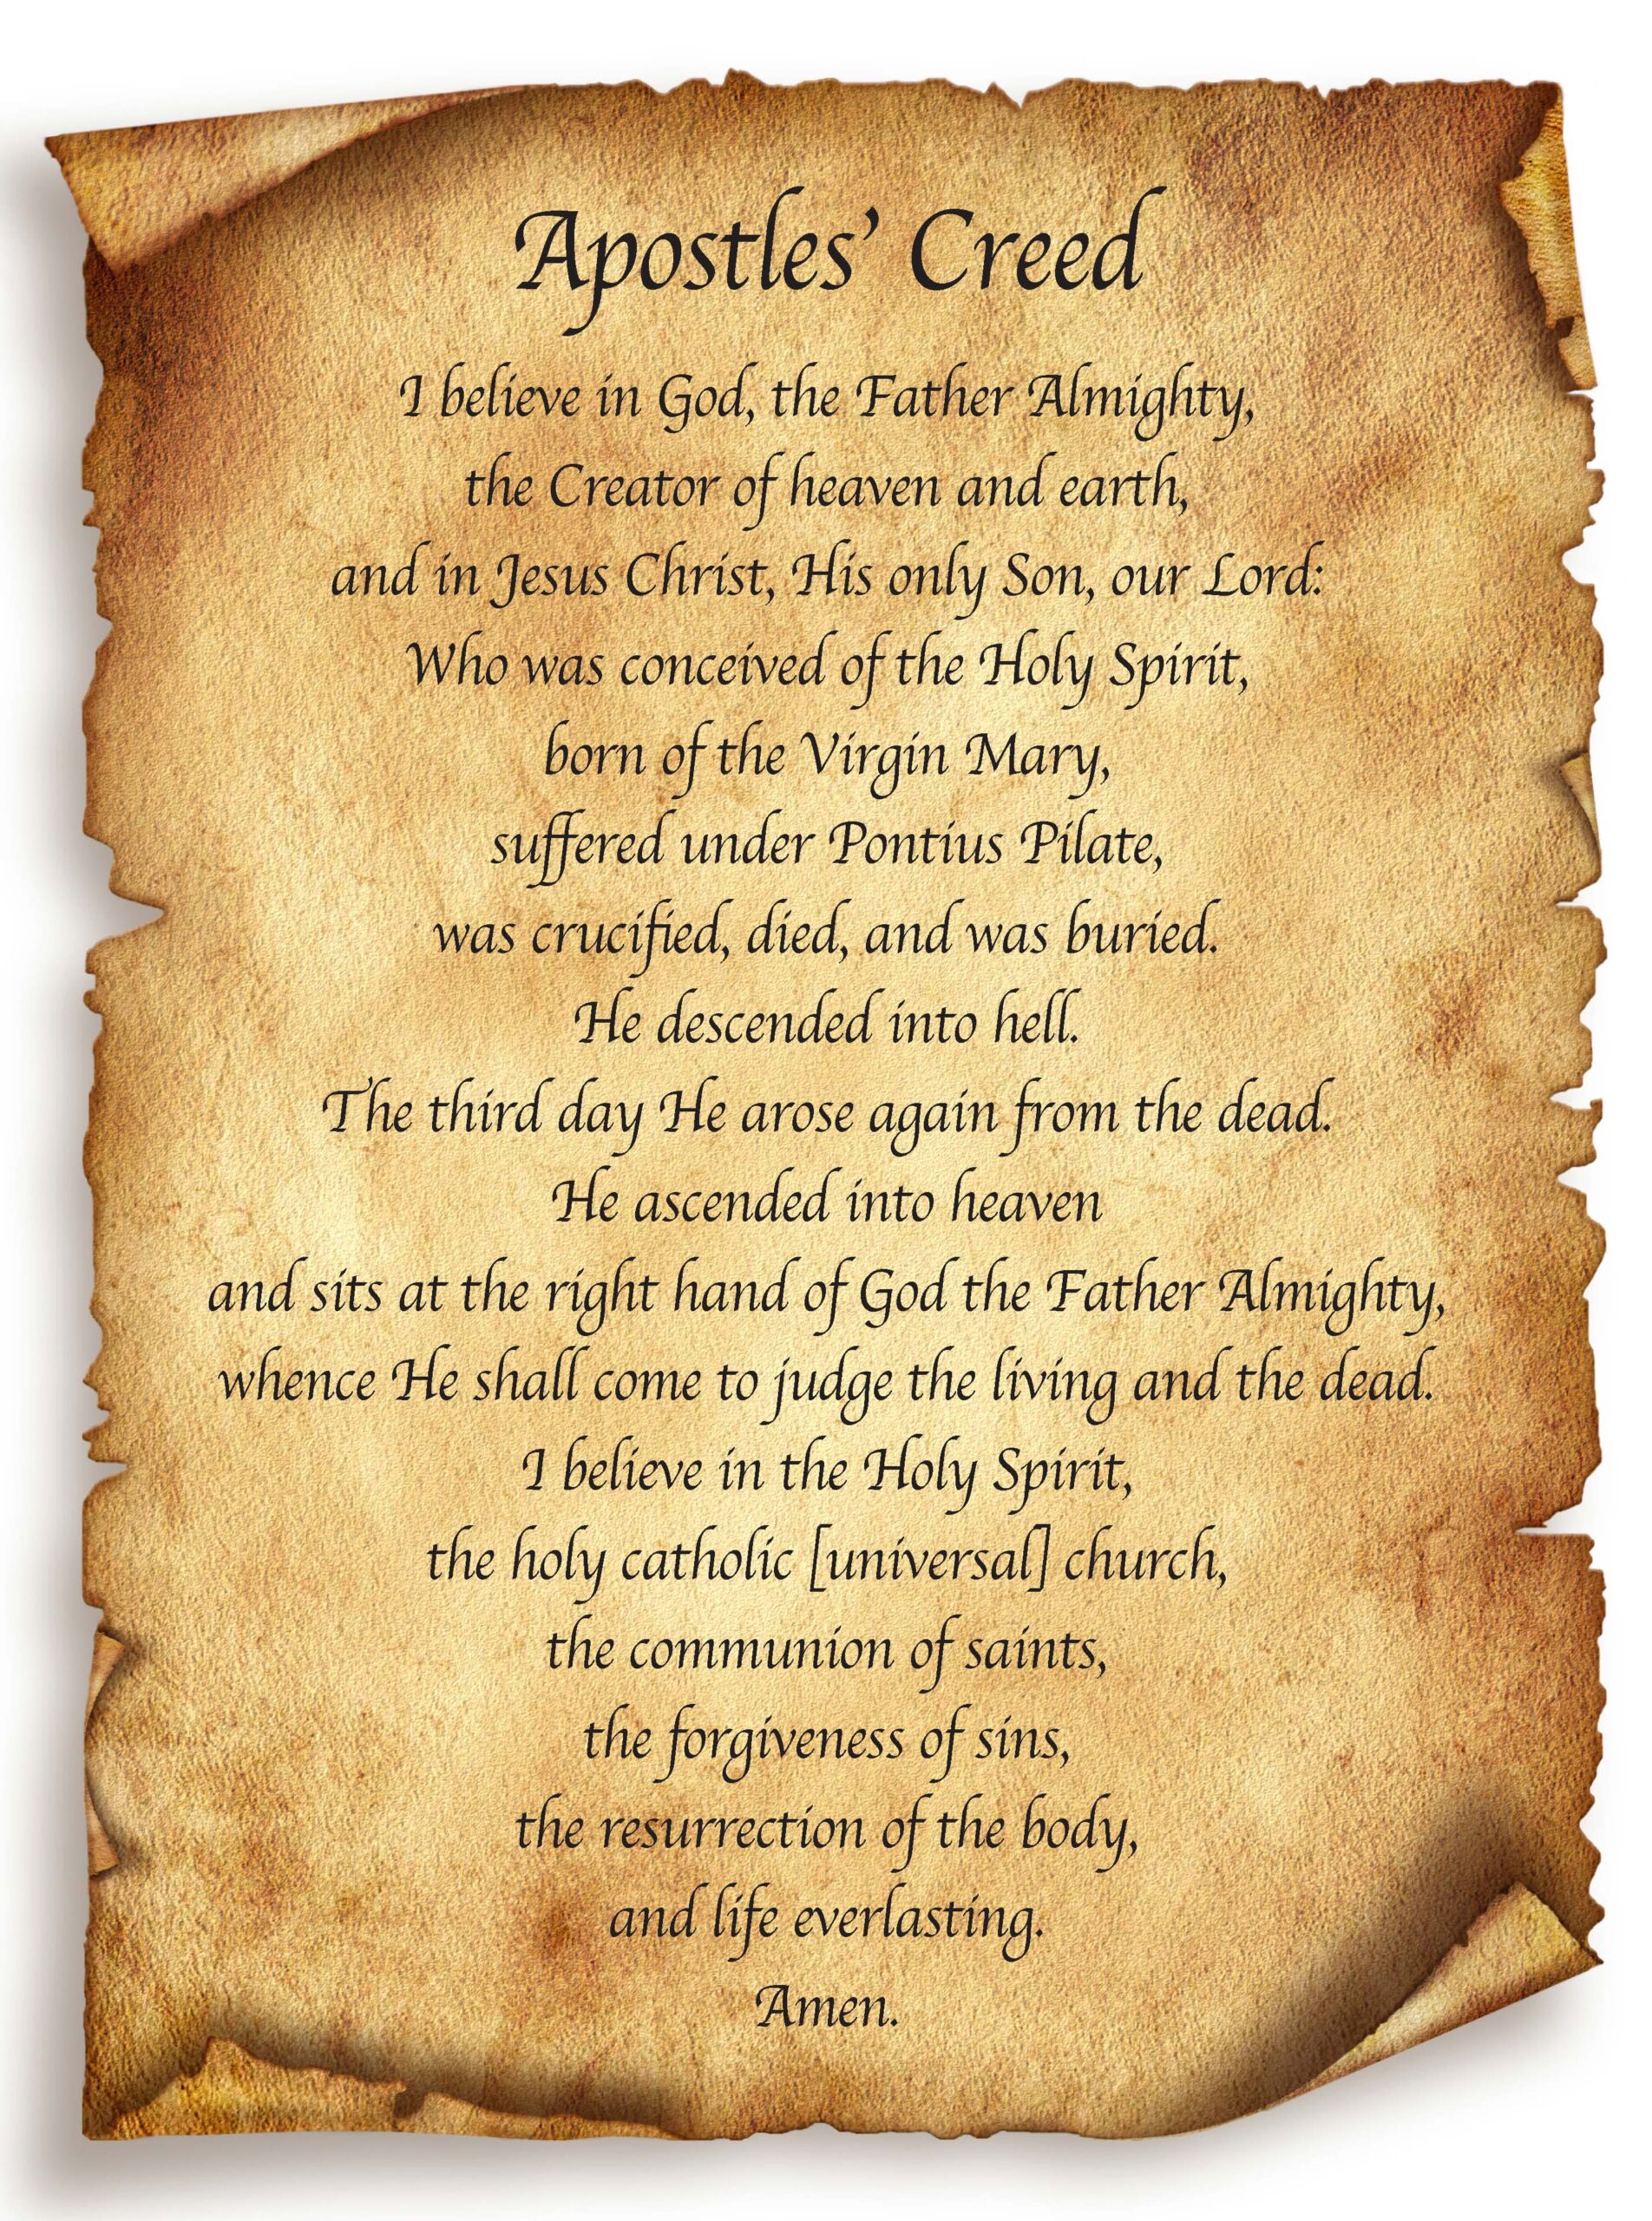 presentation of the creed and the lord's prayer